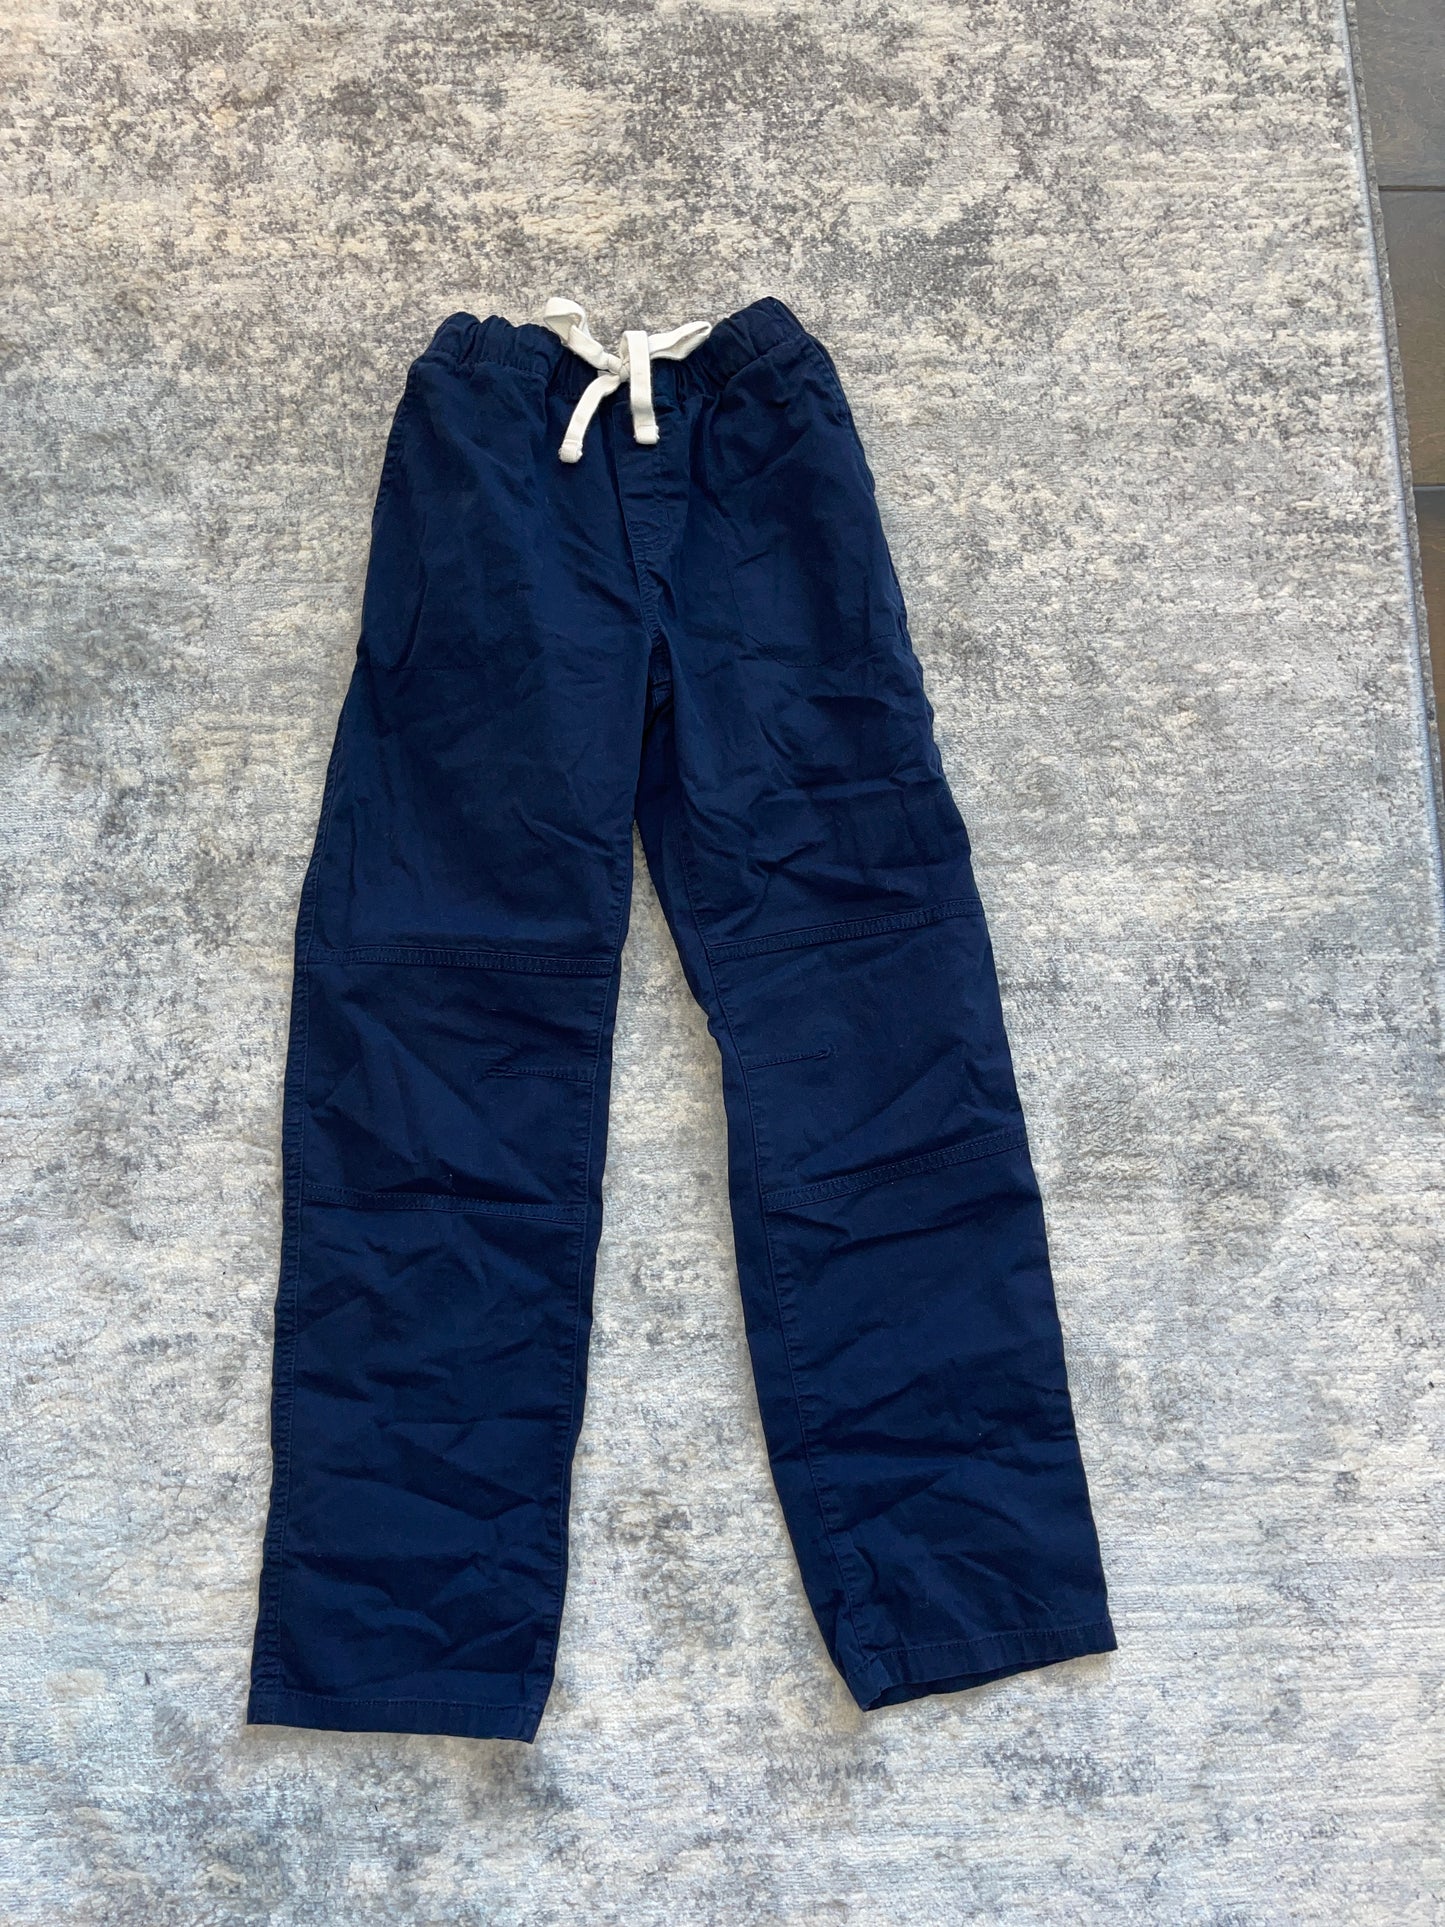 Cat and Jack Boys Pants Navy Size 16- PPU Montgomery